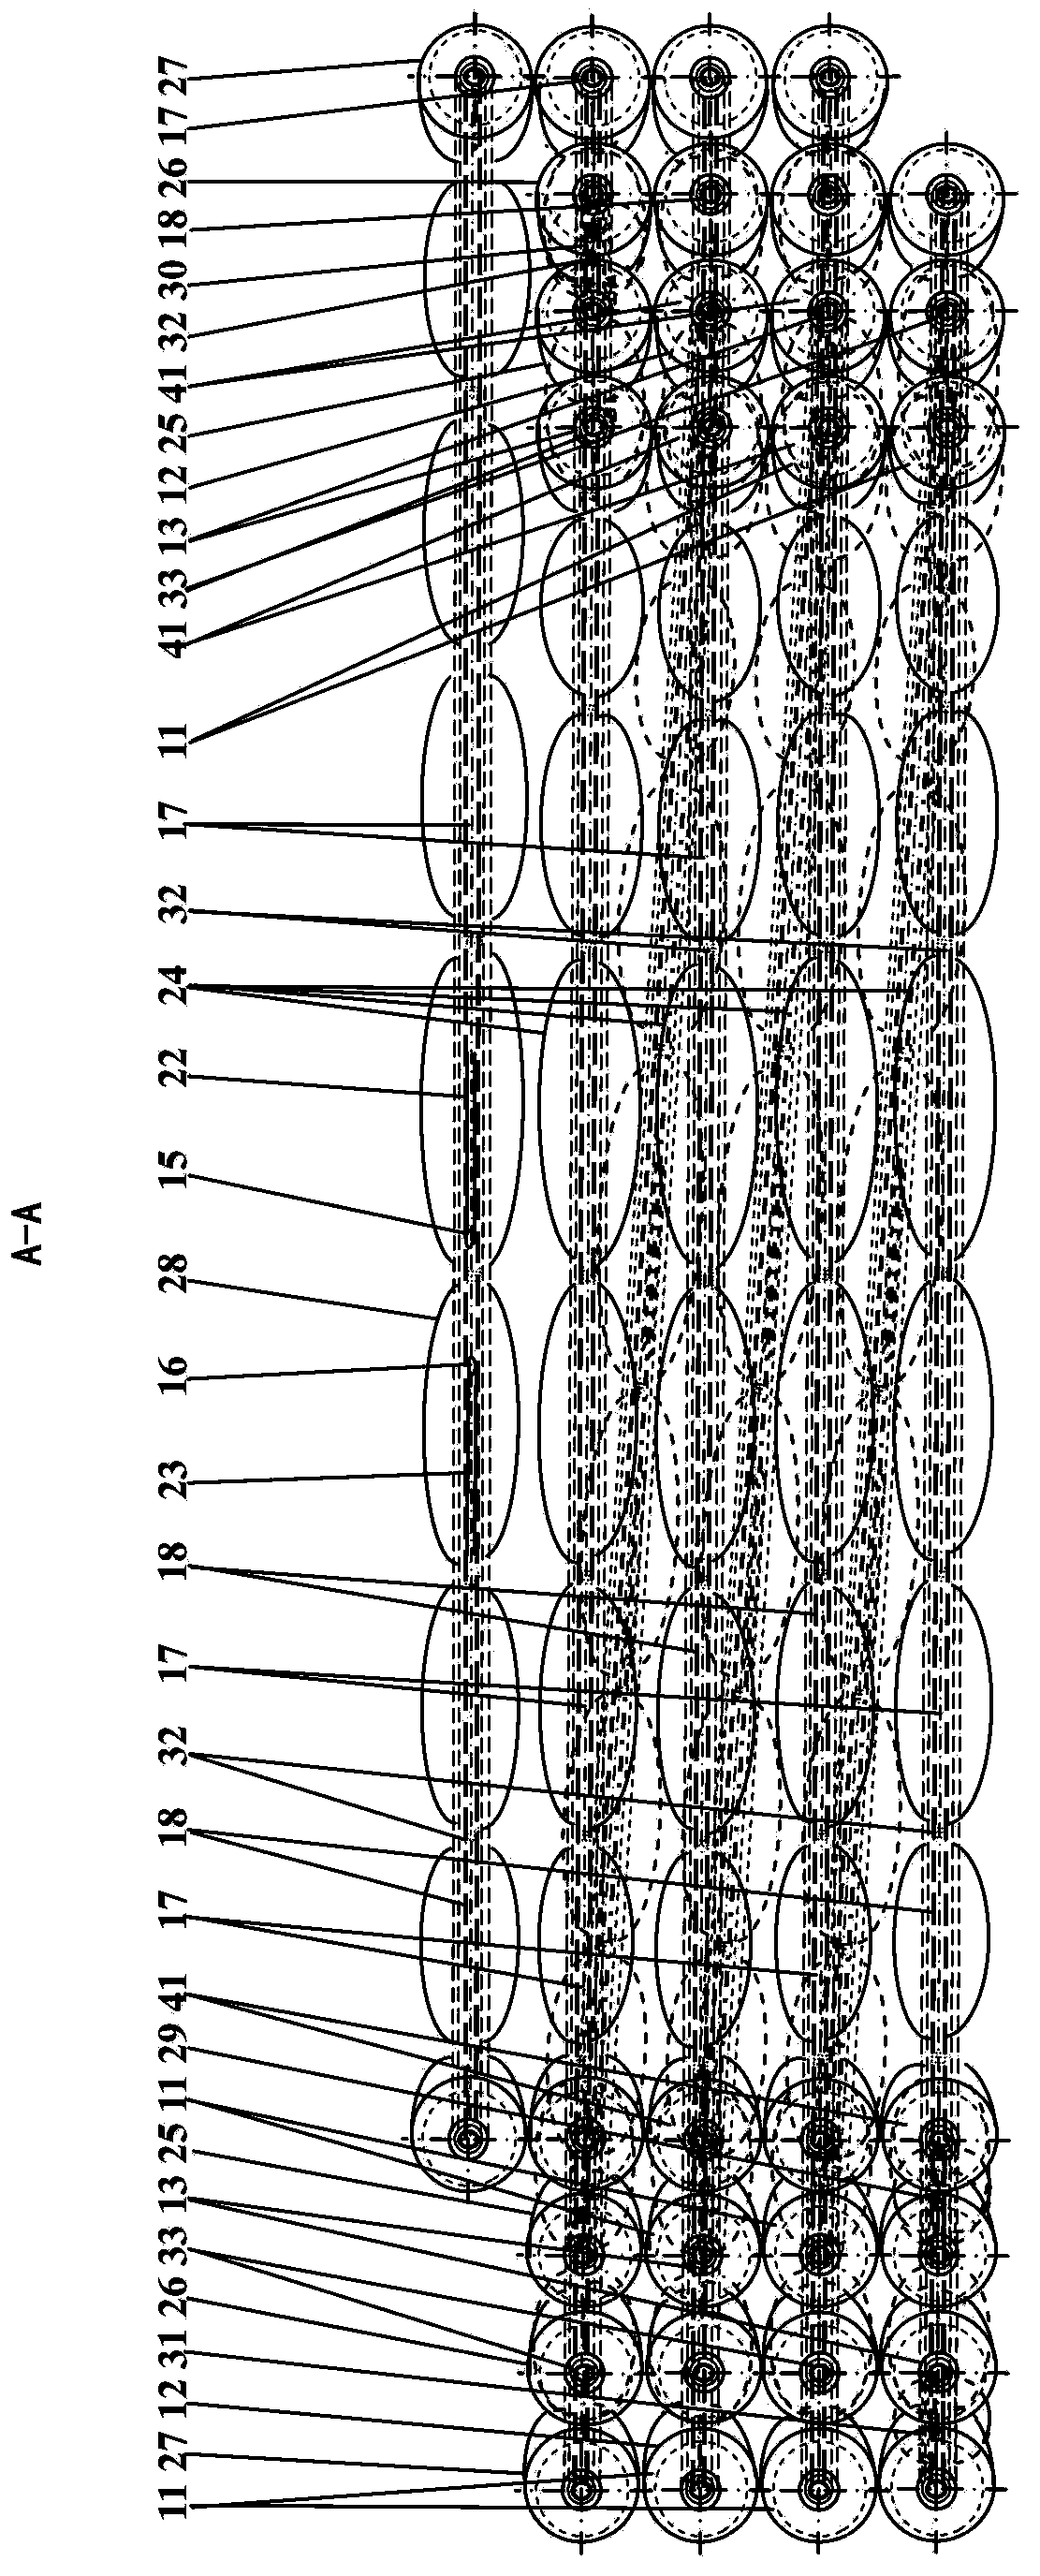 Quasi-ideal iron core and electromagnetic conversion device using same